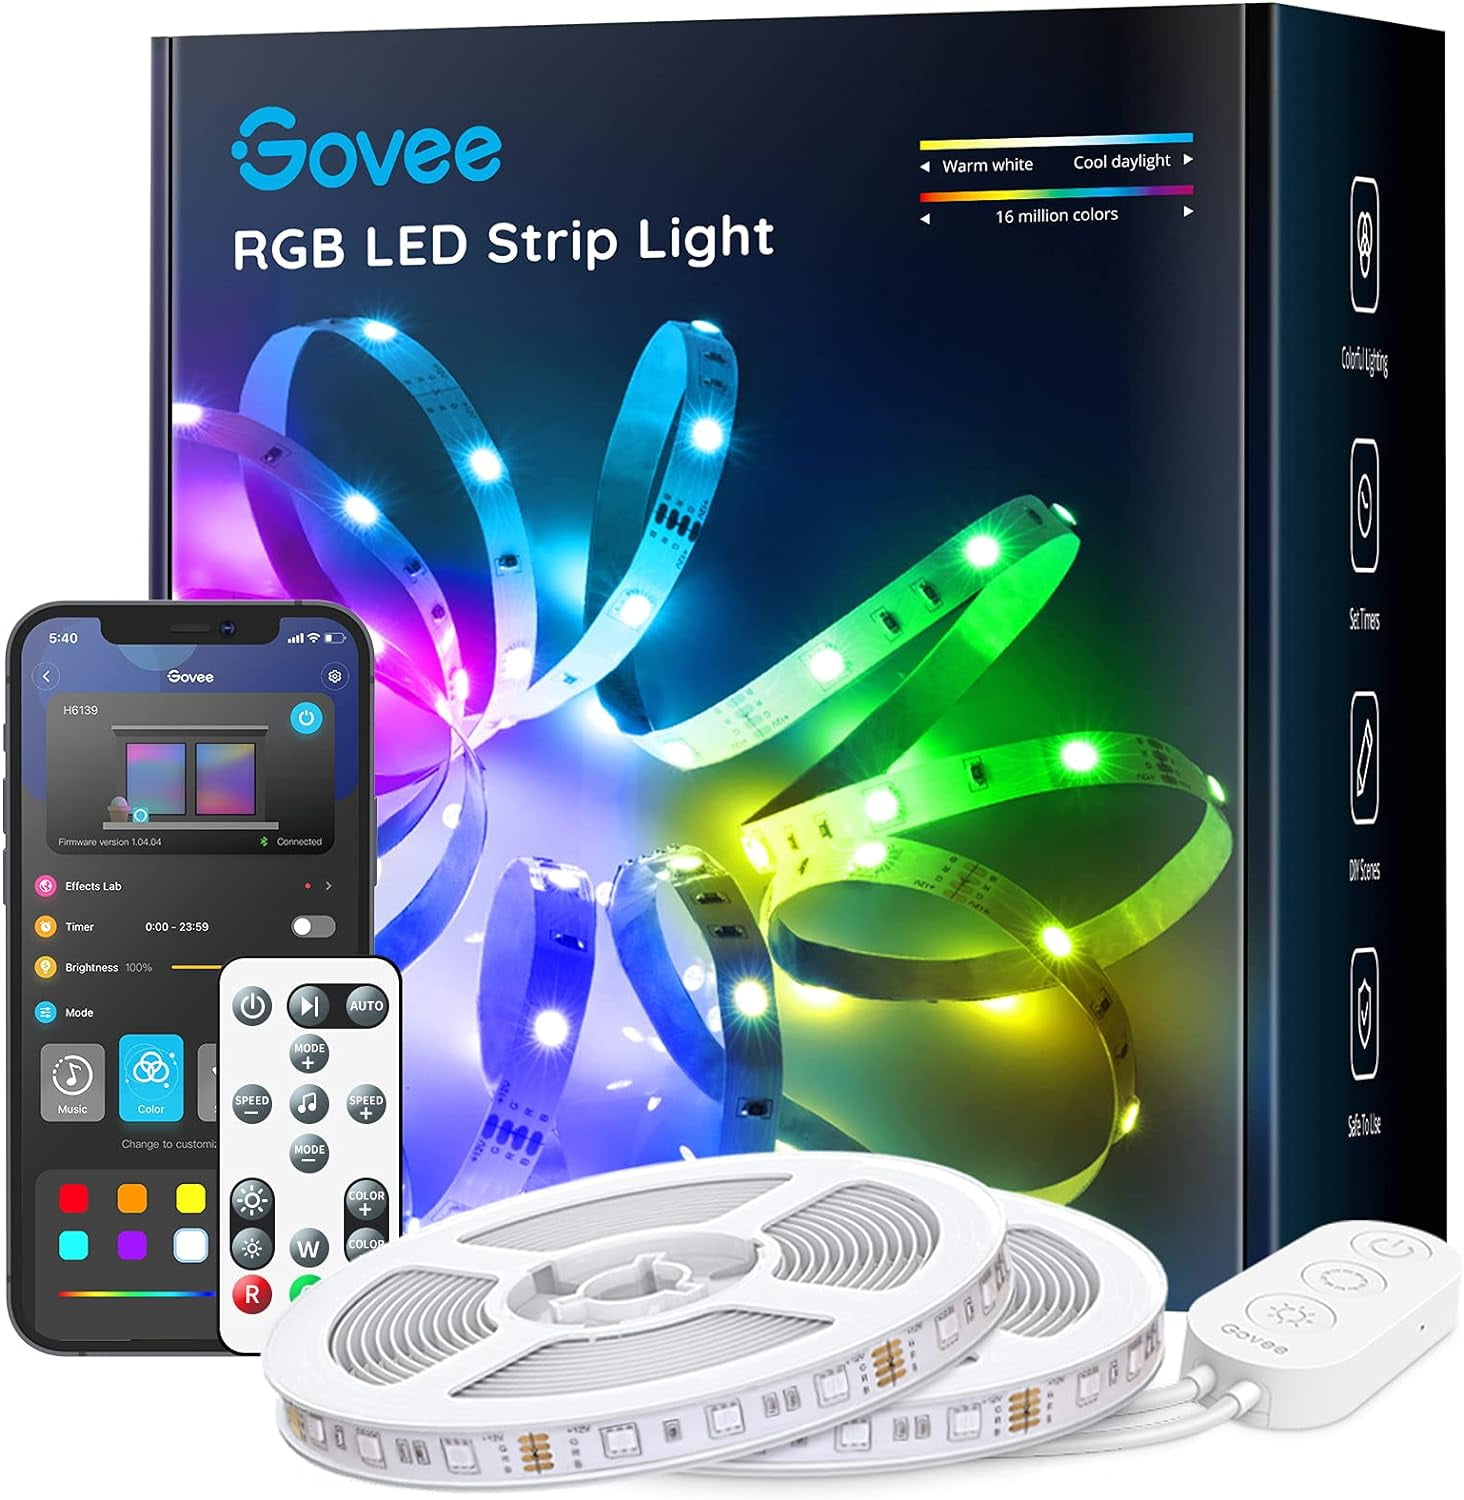 Govee RGB Colour Changing LED Strip Lights 20m x 2 with Remote & Control  Box - 2 Rolls of 10m £17.99 Sold by Govee : r/Govee